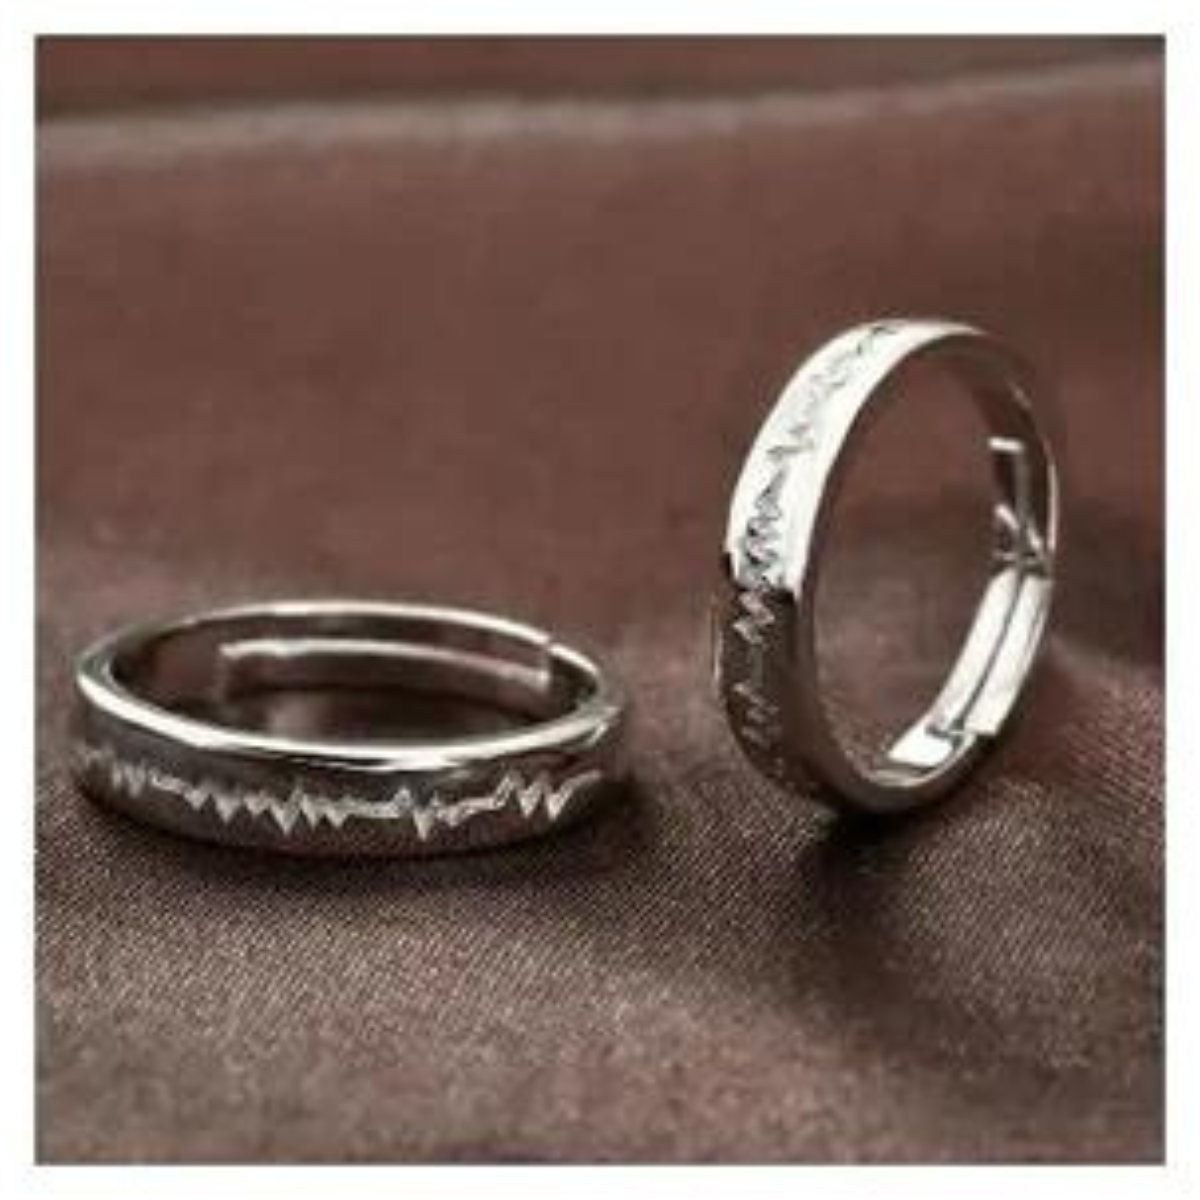 Bcughia Promise Rings for Women Couples, Mens Jewelry Rings Stainless Steel  Silver 6mm Silver Ring with Black Enamel Size 7 for Women and Size 7 for  Men|Amazon.com